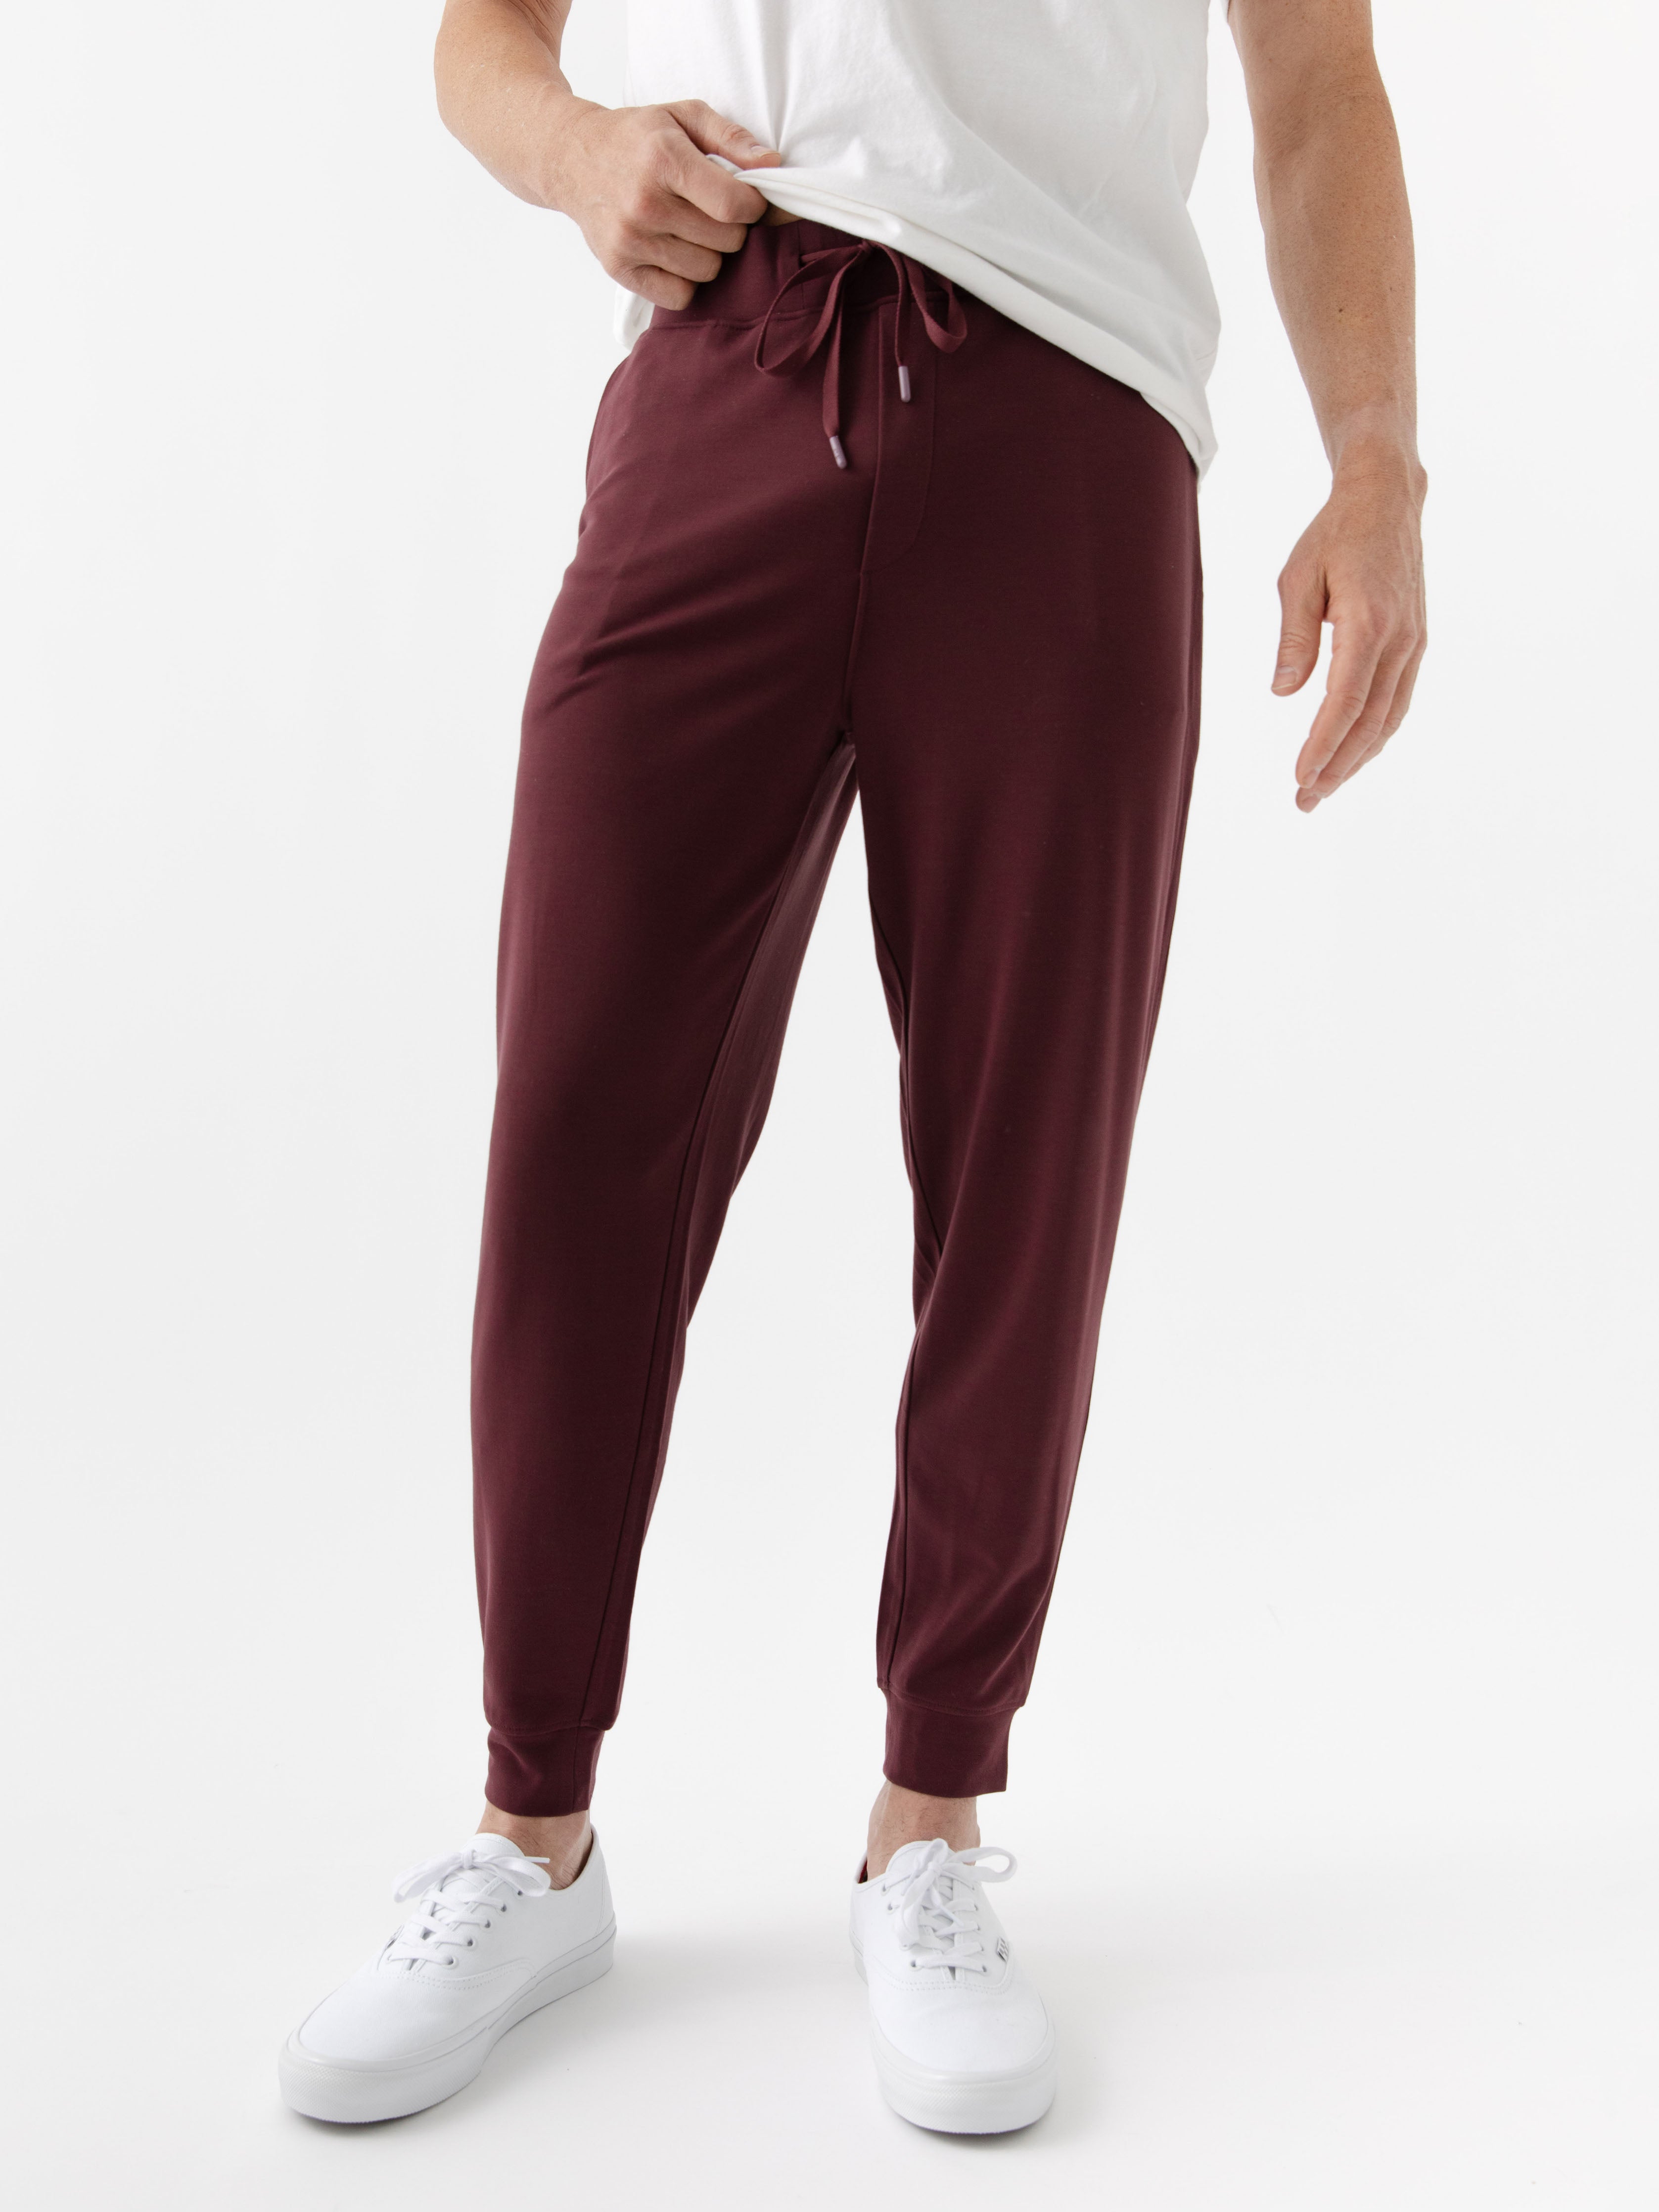 Burgundy/Light GreyMen's Bamboo Jogger Set. There is a man wearing the jogger set. He is standing in a well lit room in a home.|Color:Burgundy